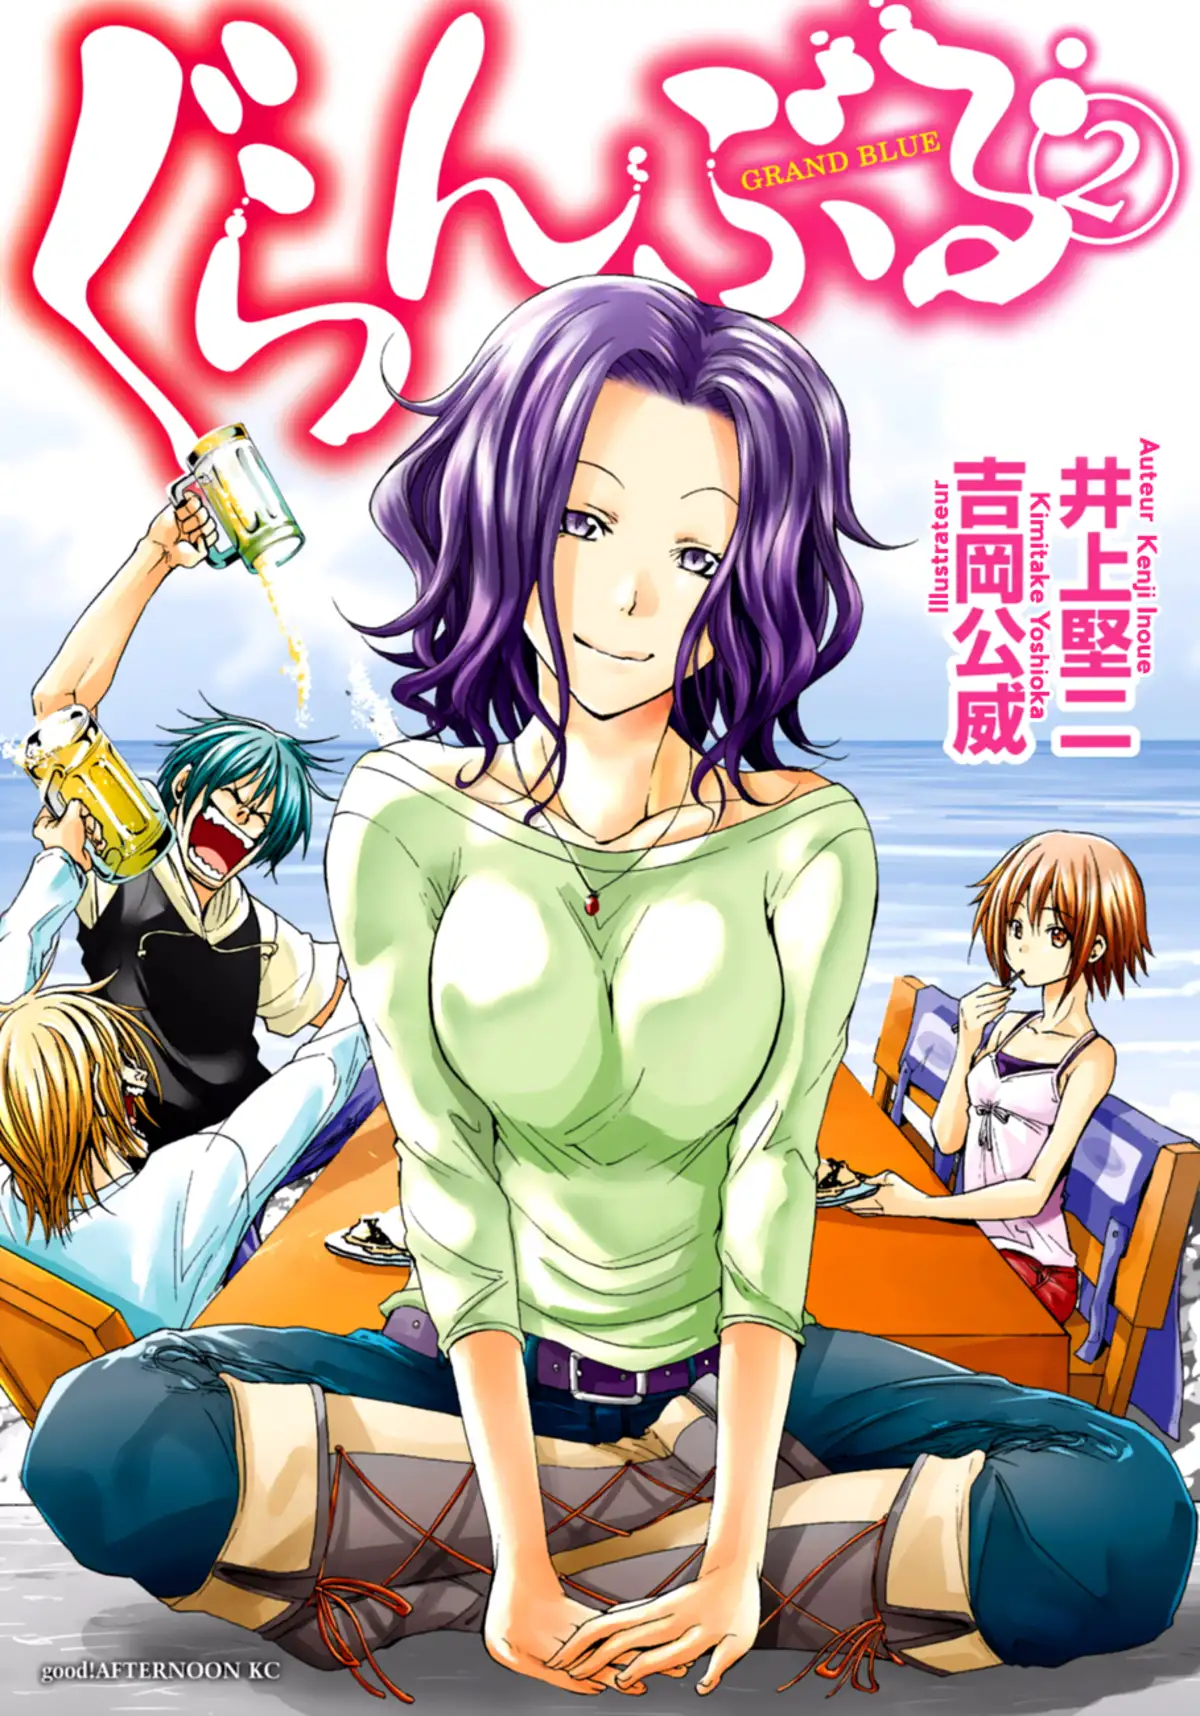 Grand Blue Volume 2 page 2